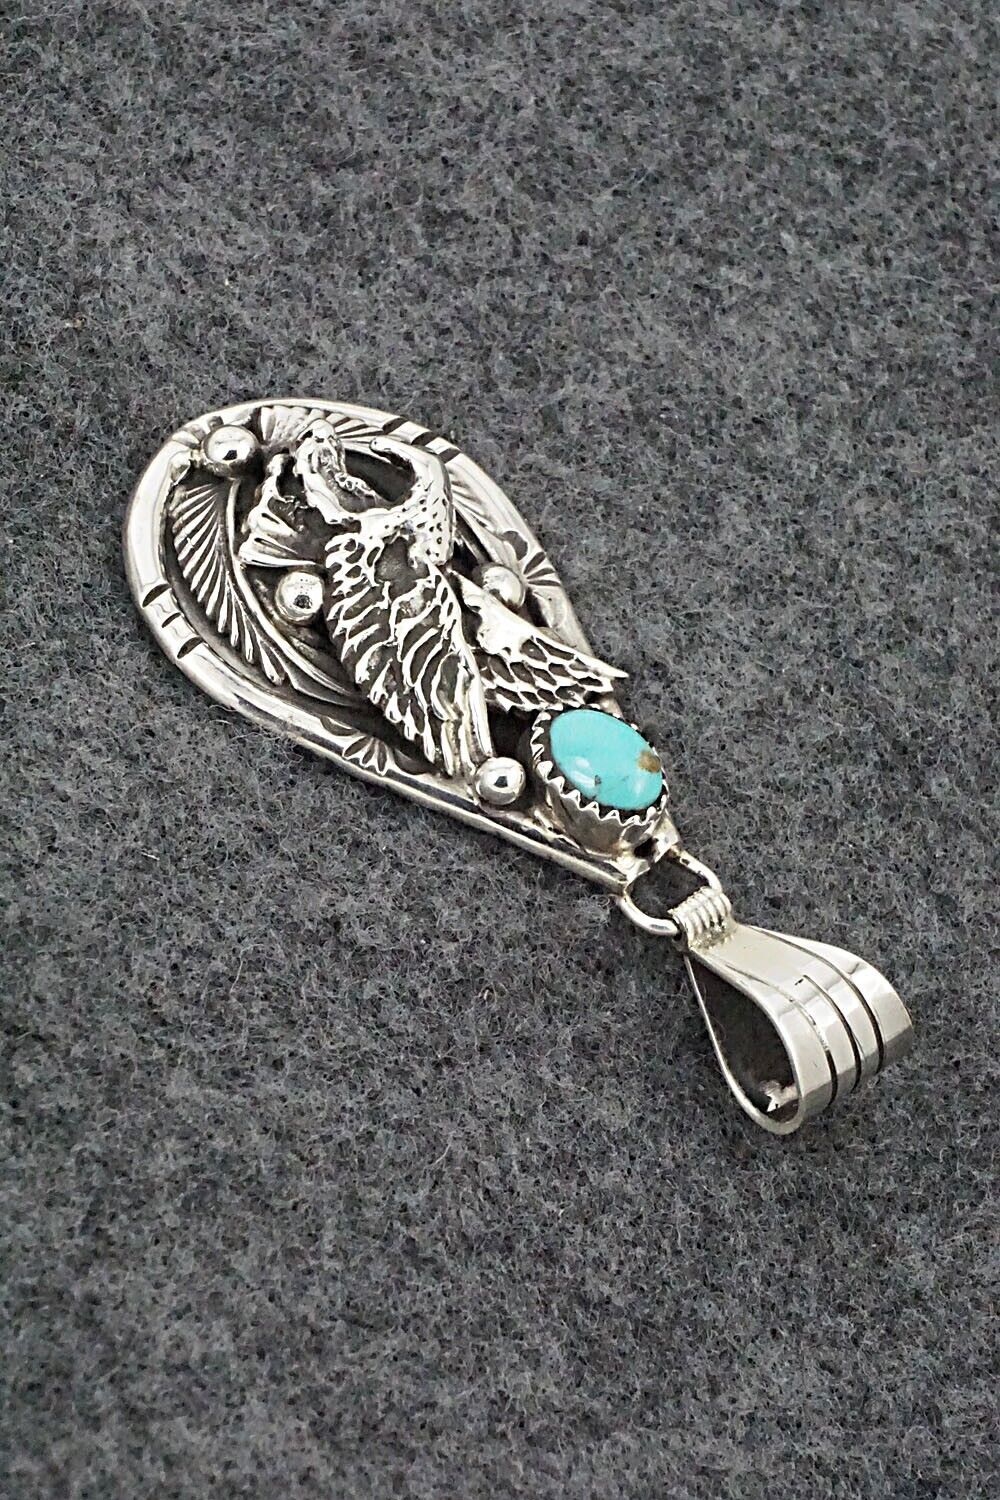 Turquoise & Sterling Silver Pendant - Henry Attakai